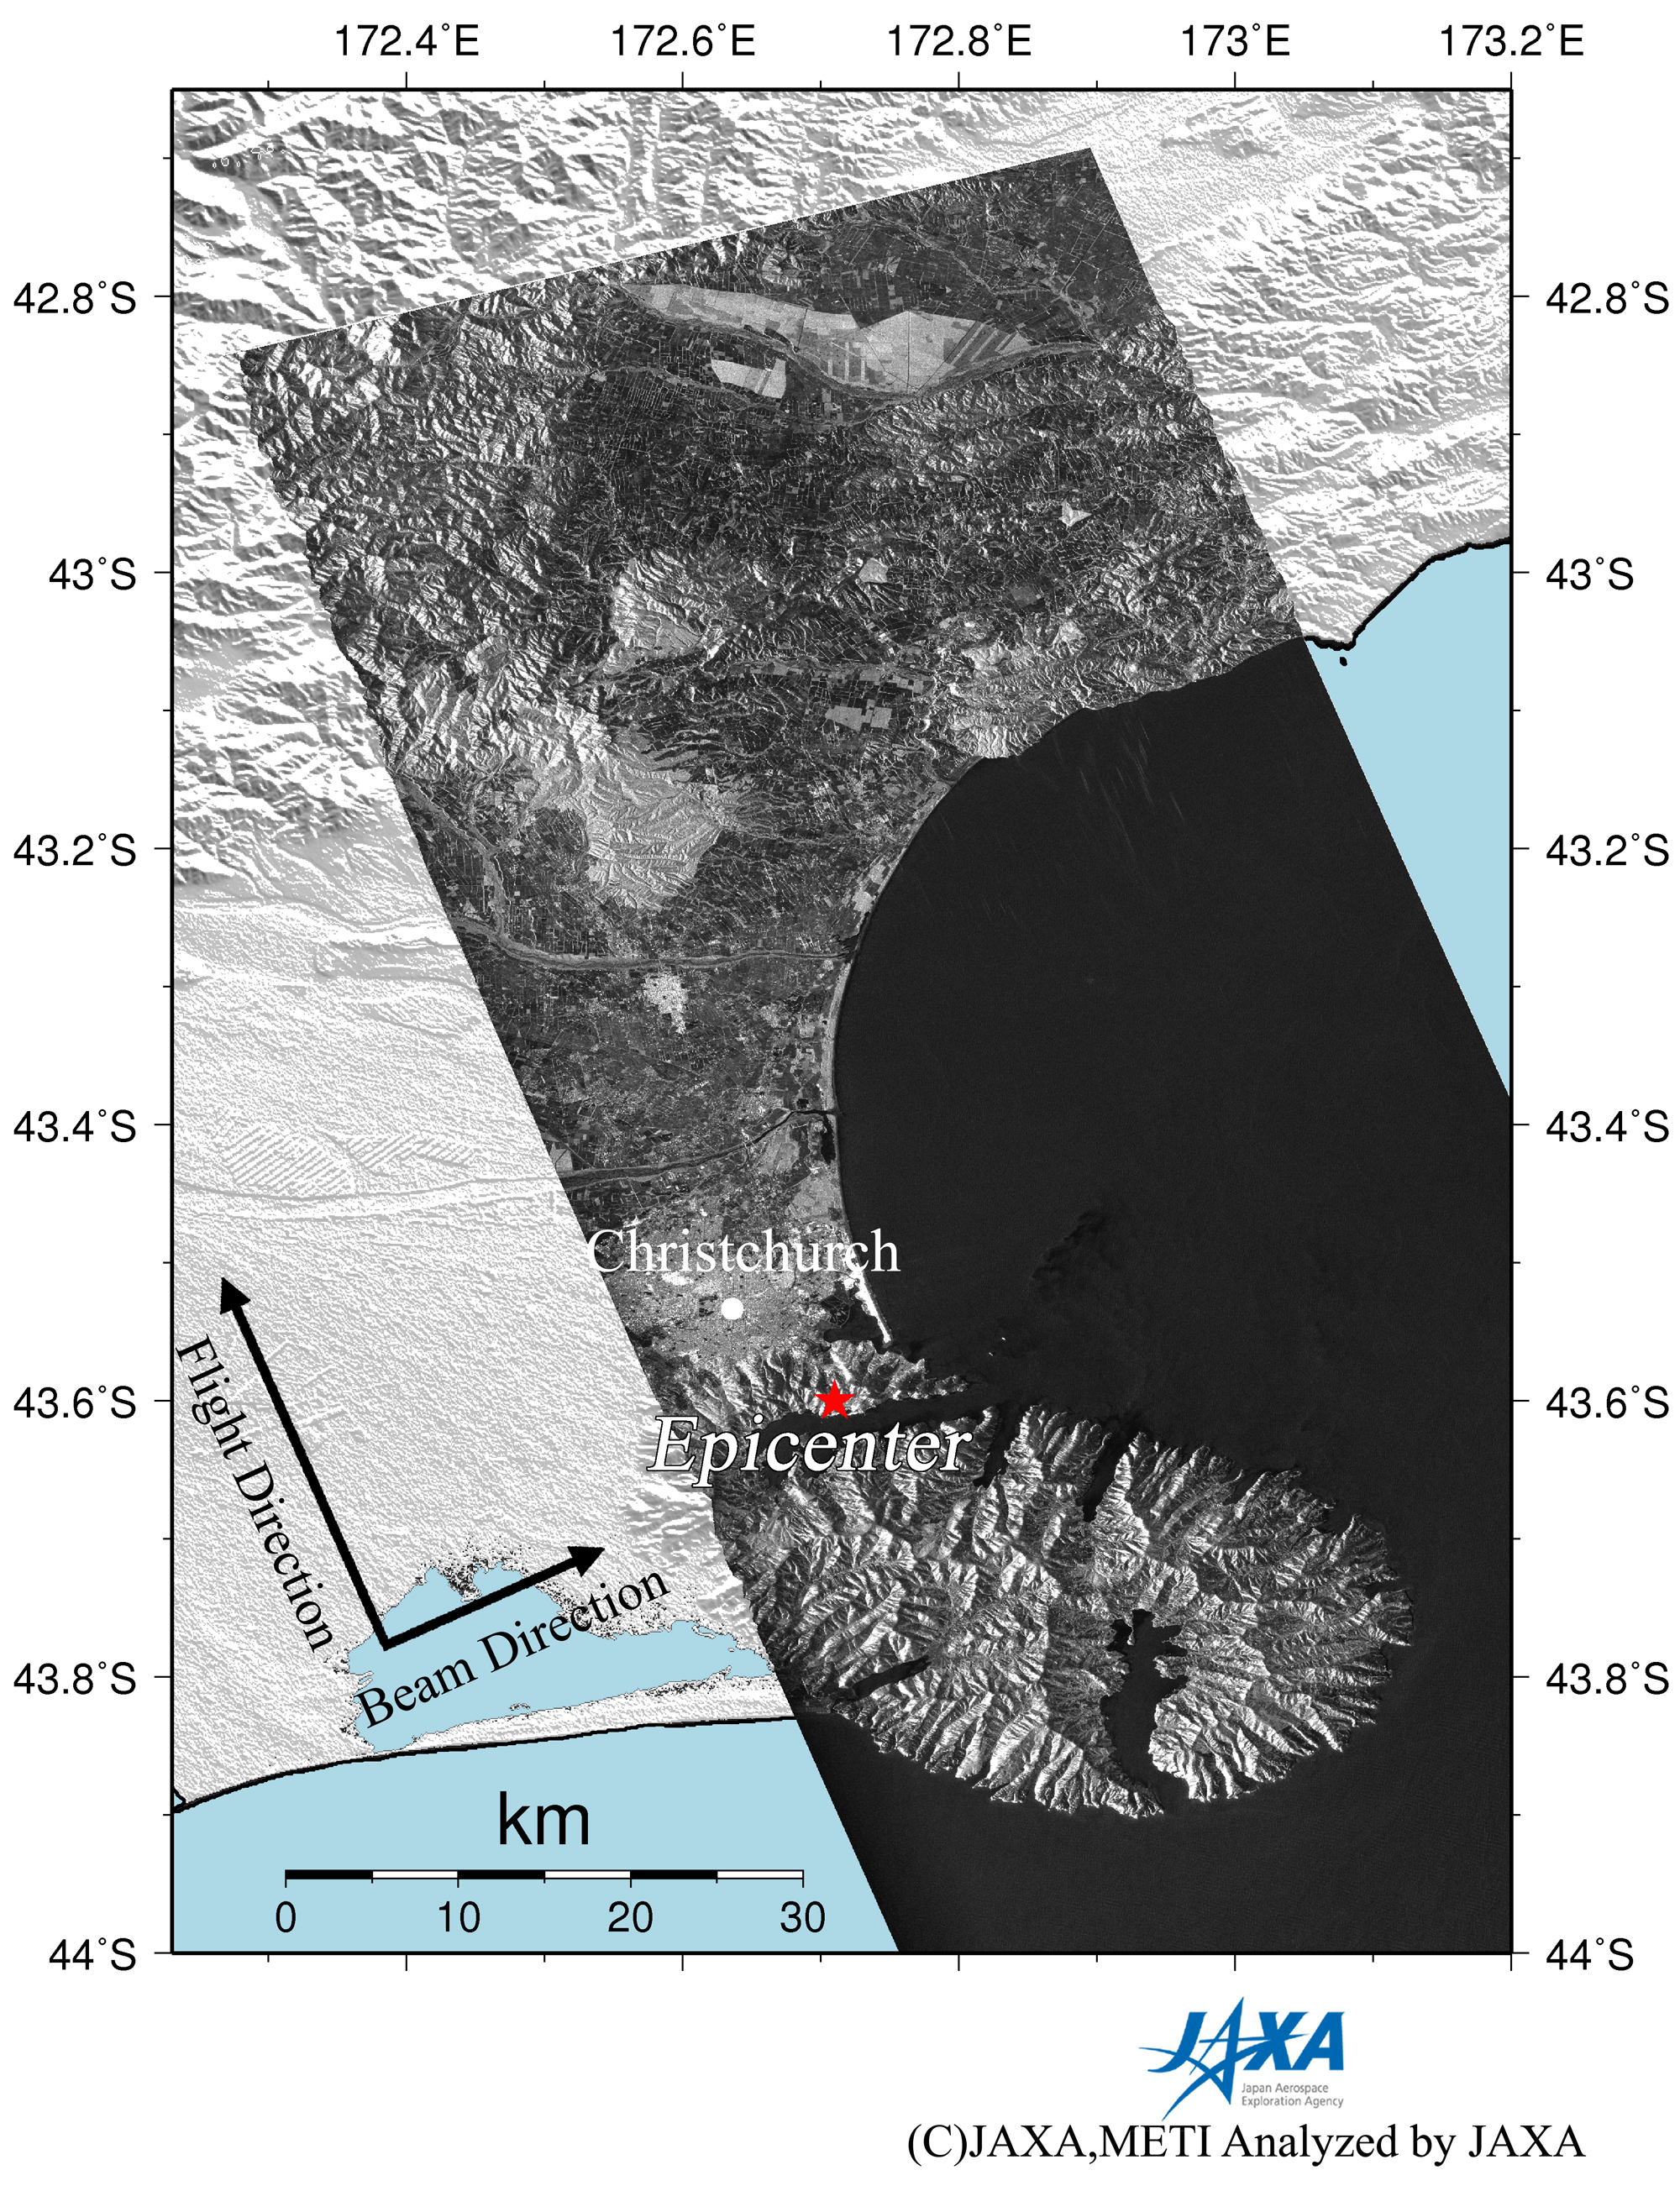 Figure 2 right is a PALSAR amplitude image observed after the earthquake (2011/2/25).